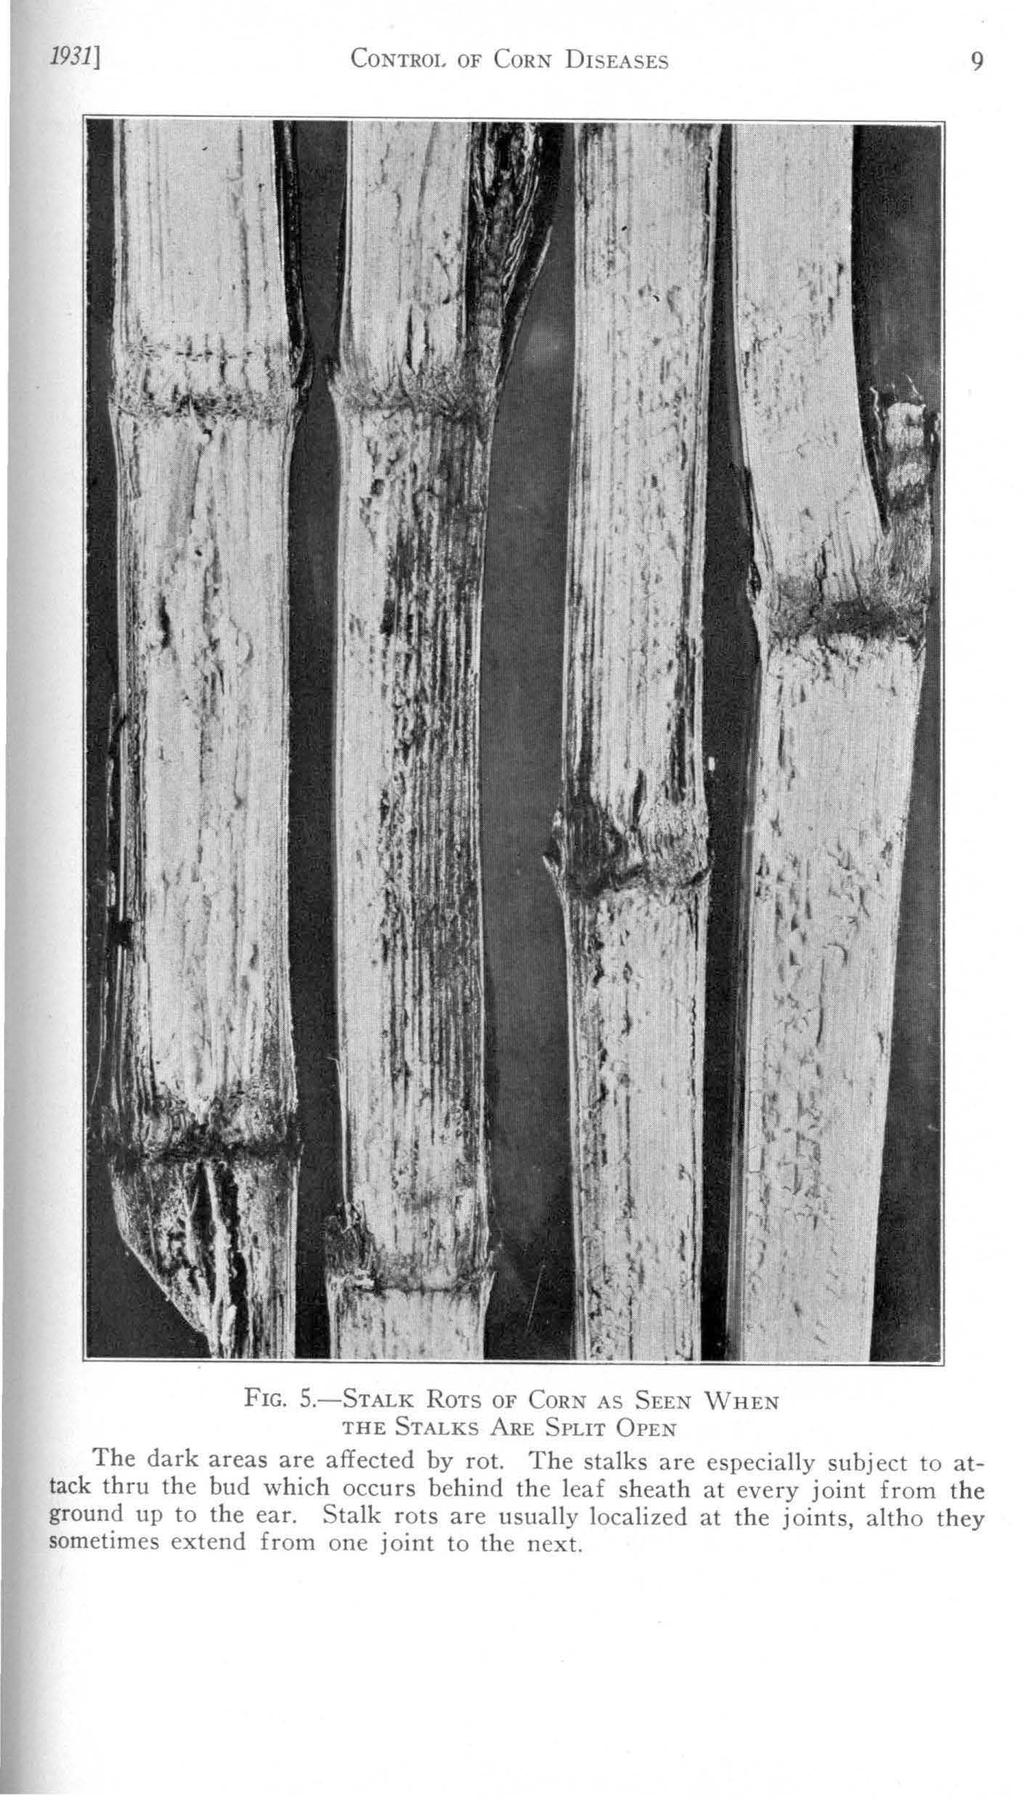 1931] CoNTROL OF CoRN DisEASEs 9 FIG. 5.-STALK ROTS OF CORN AS SEEN WHEN THE STALKS ARE SPLIT OPEN The dark areas are affected by rot.